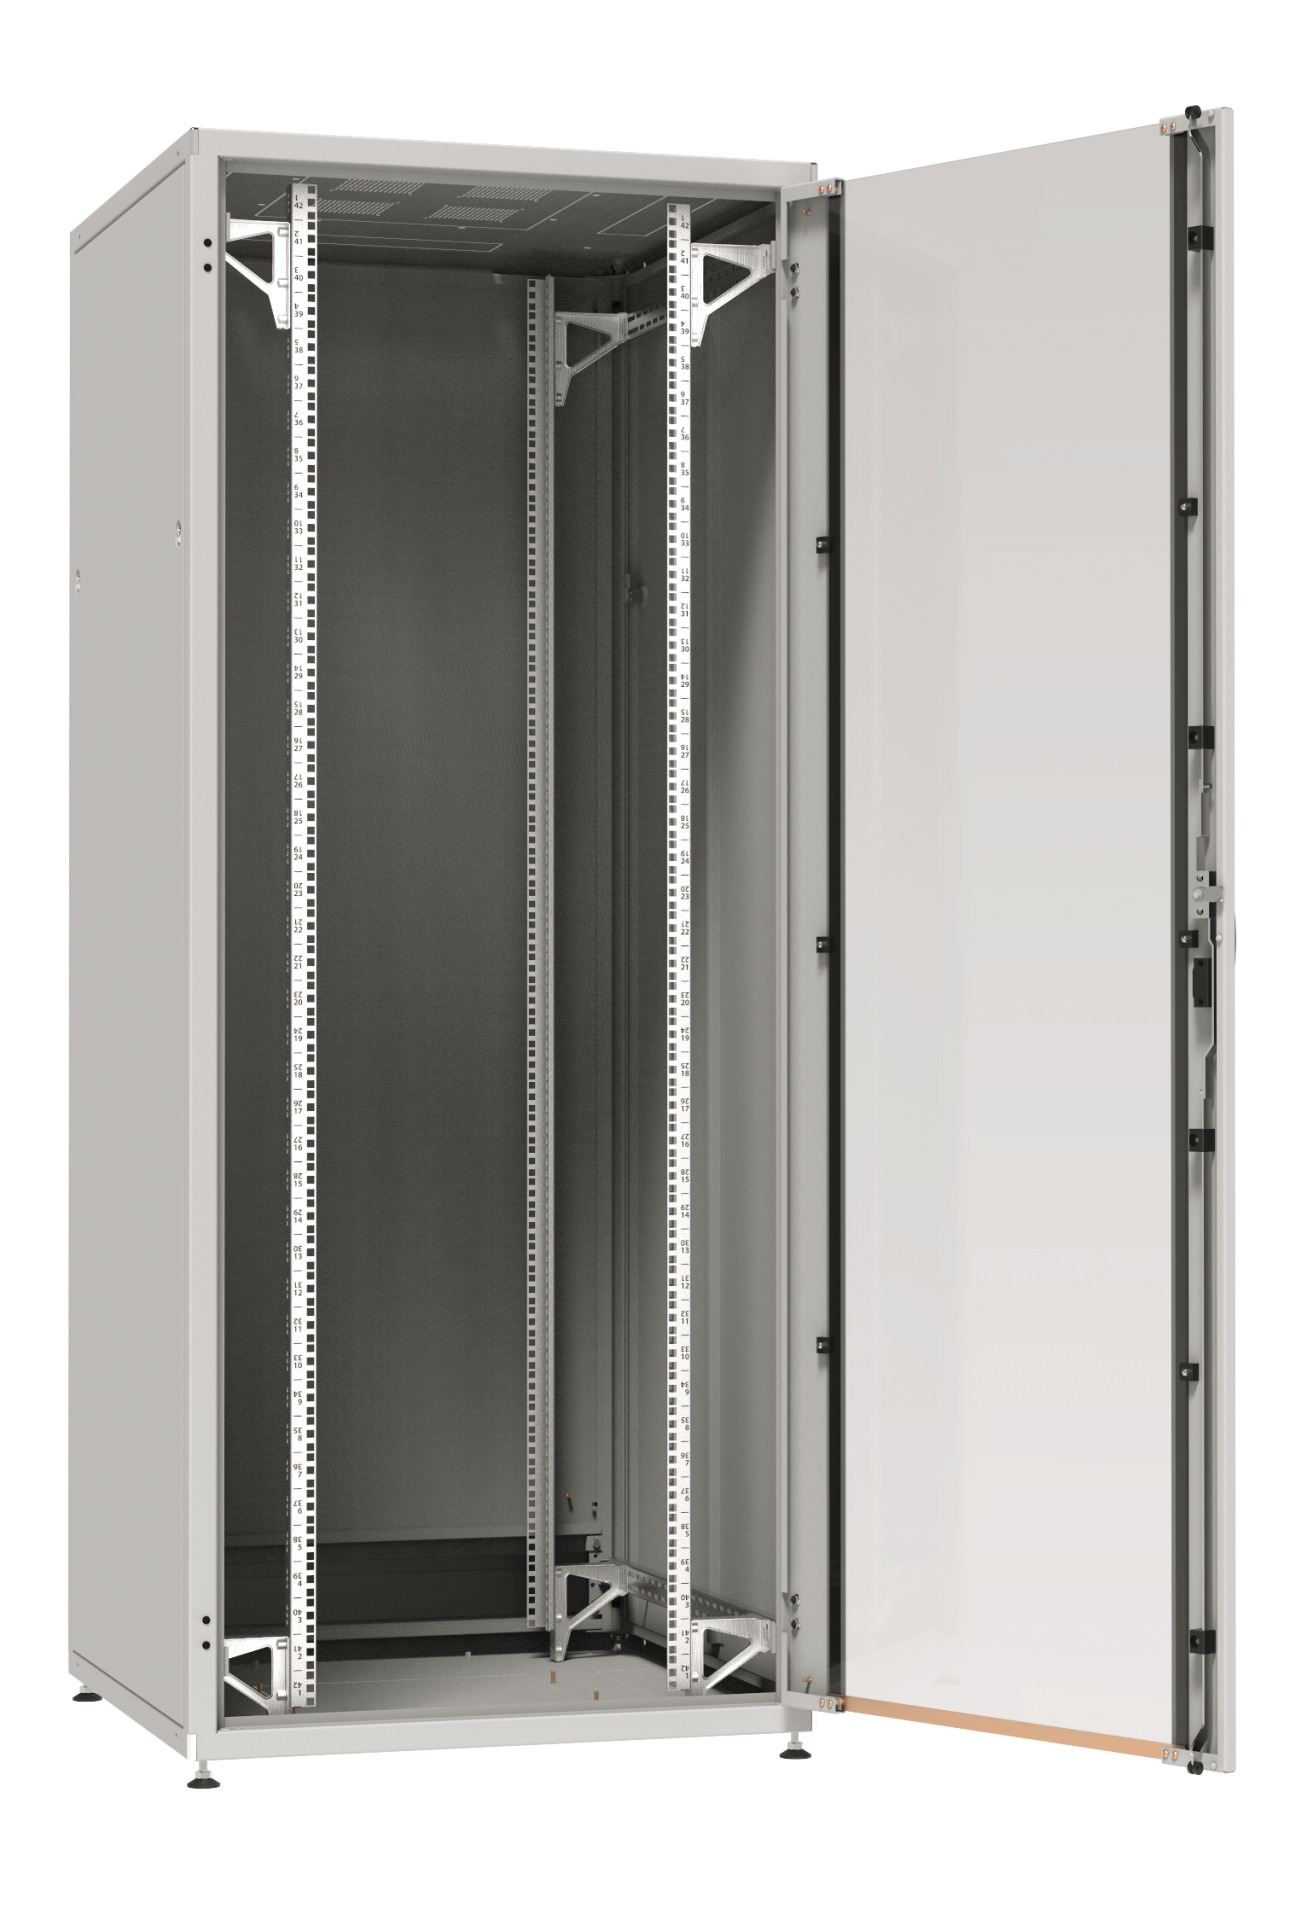 19" Network Cabinet PRO 18U, 800x800 mm, RAL7035, Rear Door with Turning Handle